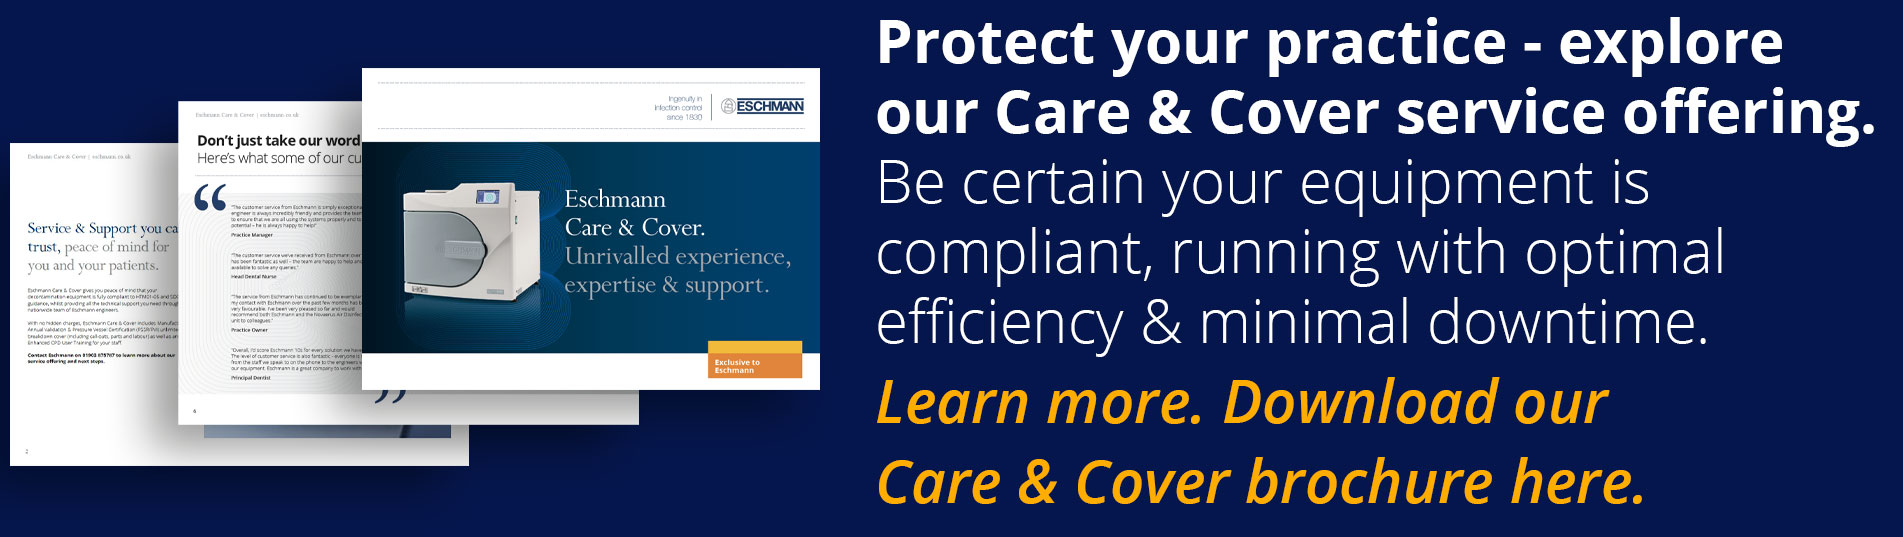 Protect your practice - exploreour Care & Cover service offering. Be certain your equipment is compliant, running with optimal efficiency & minimal downtime. Learn more. Download our Care & Cover brochure here.